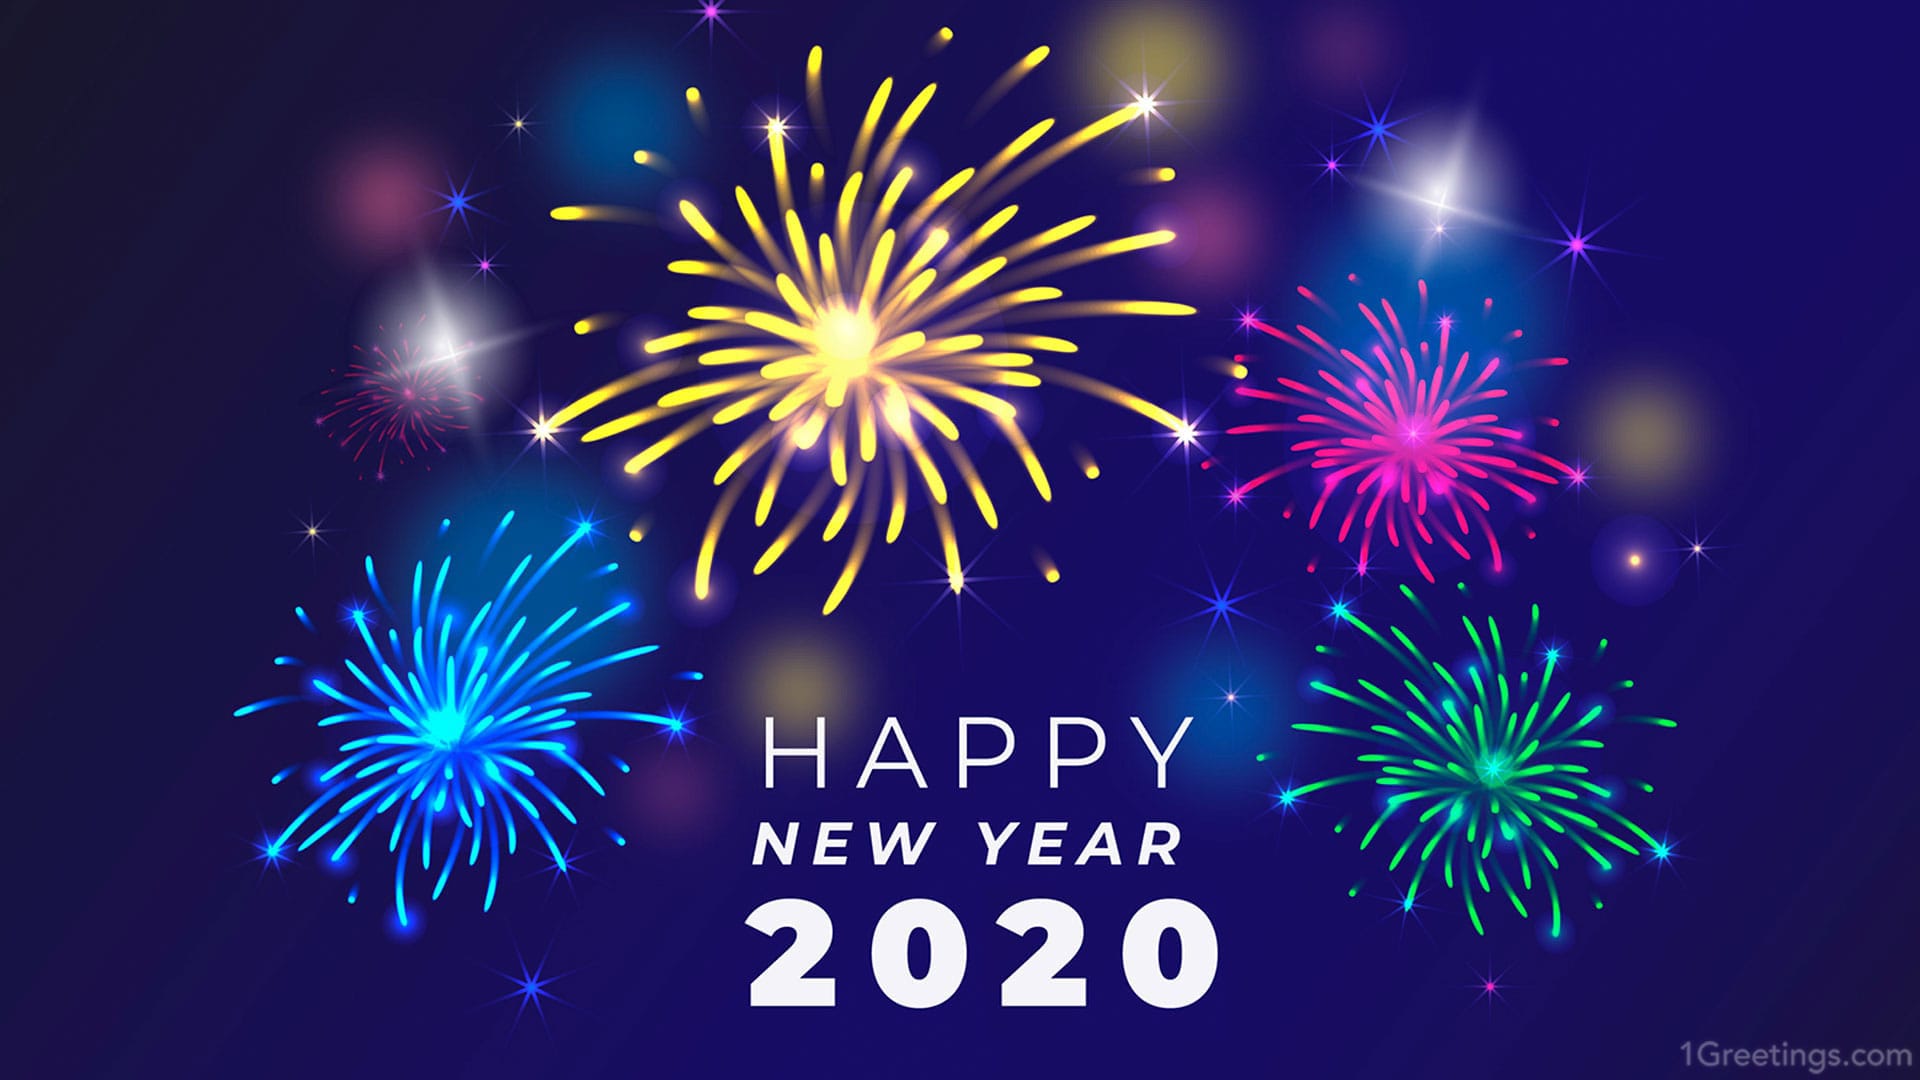 Full HD happy new year 2020 wallpaper 2019 for pc